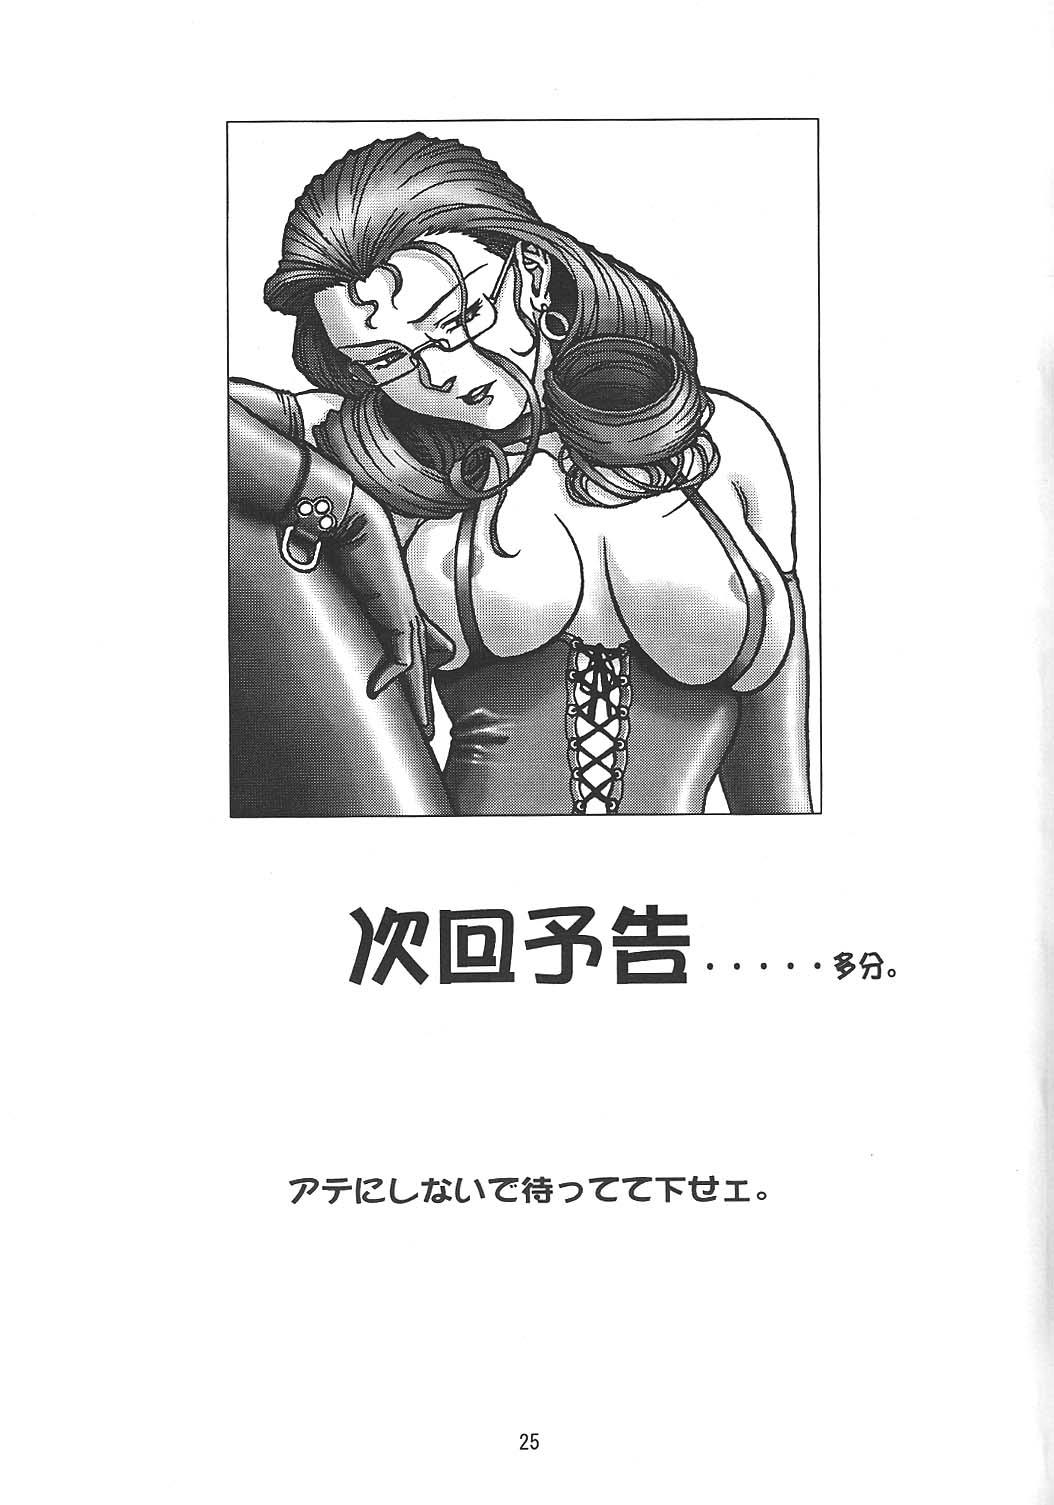 Pussylicking Mama Royal Gamma - Super doll licca-chan Gear fighter dendoh Teenage - Page 24